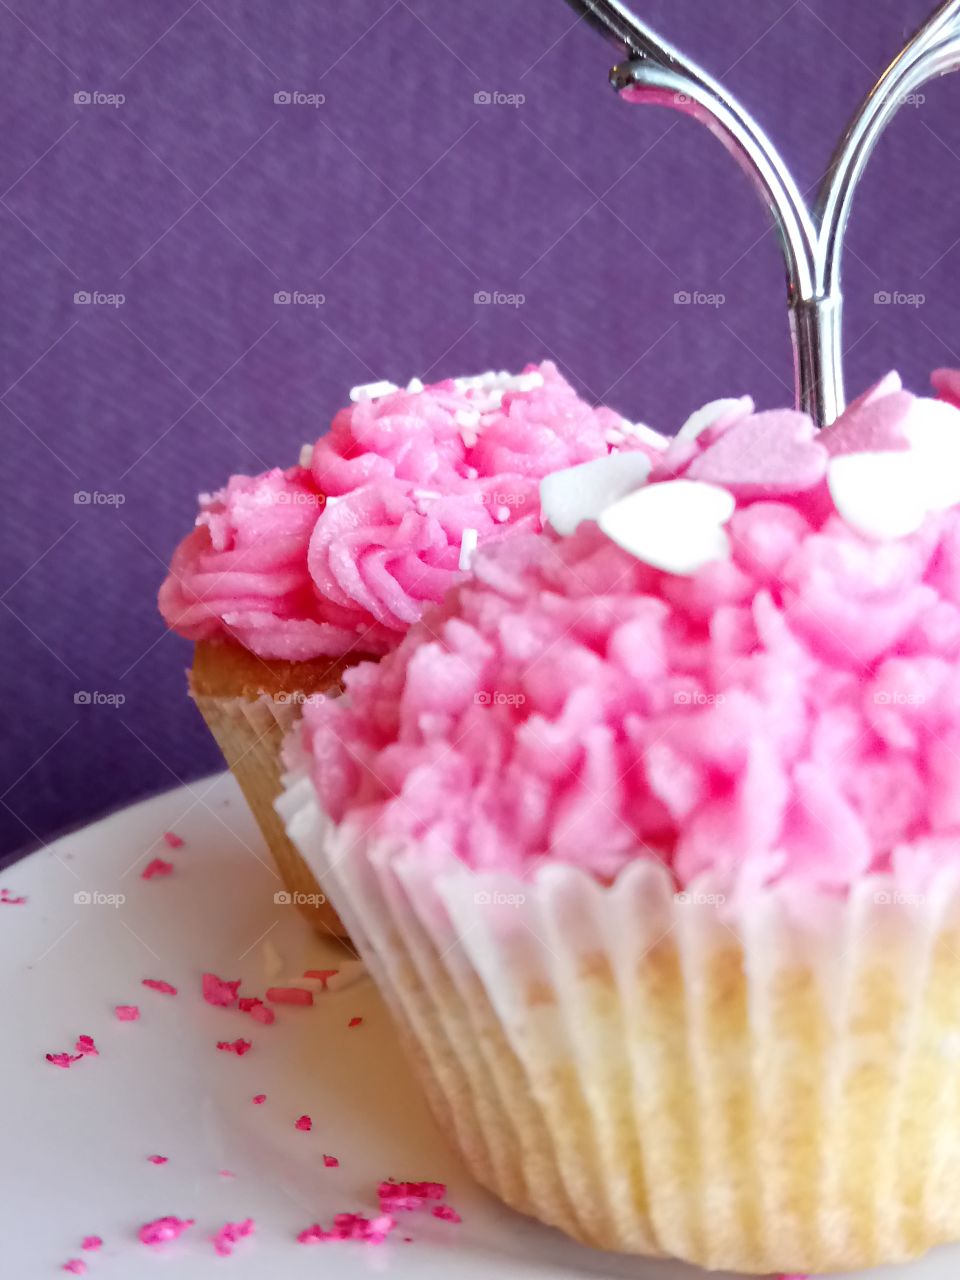 Cupcakes in pink